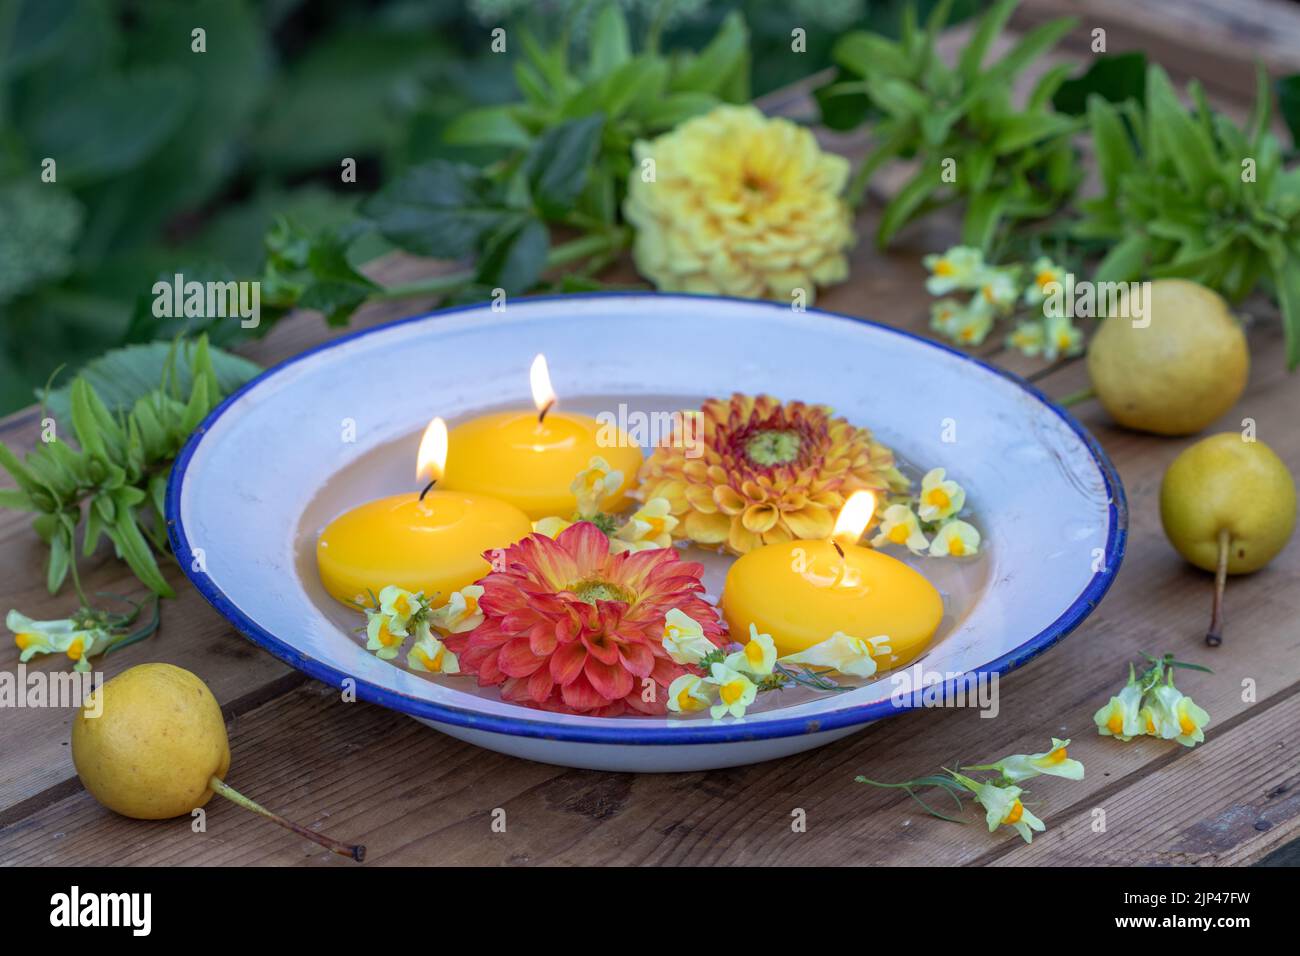 floating candles and dahlia flowers in enamel plate in garden Stock Photo